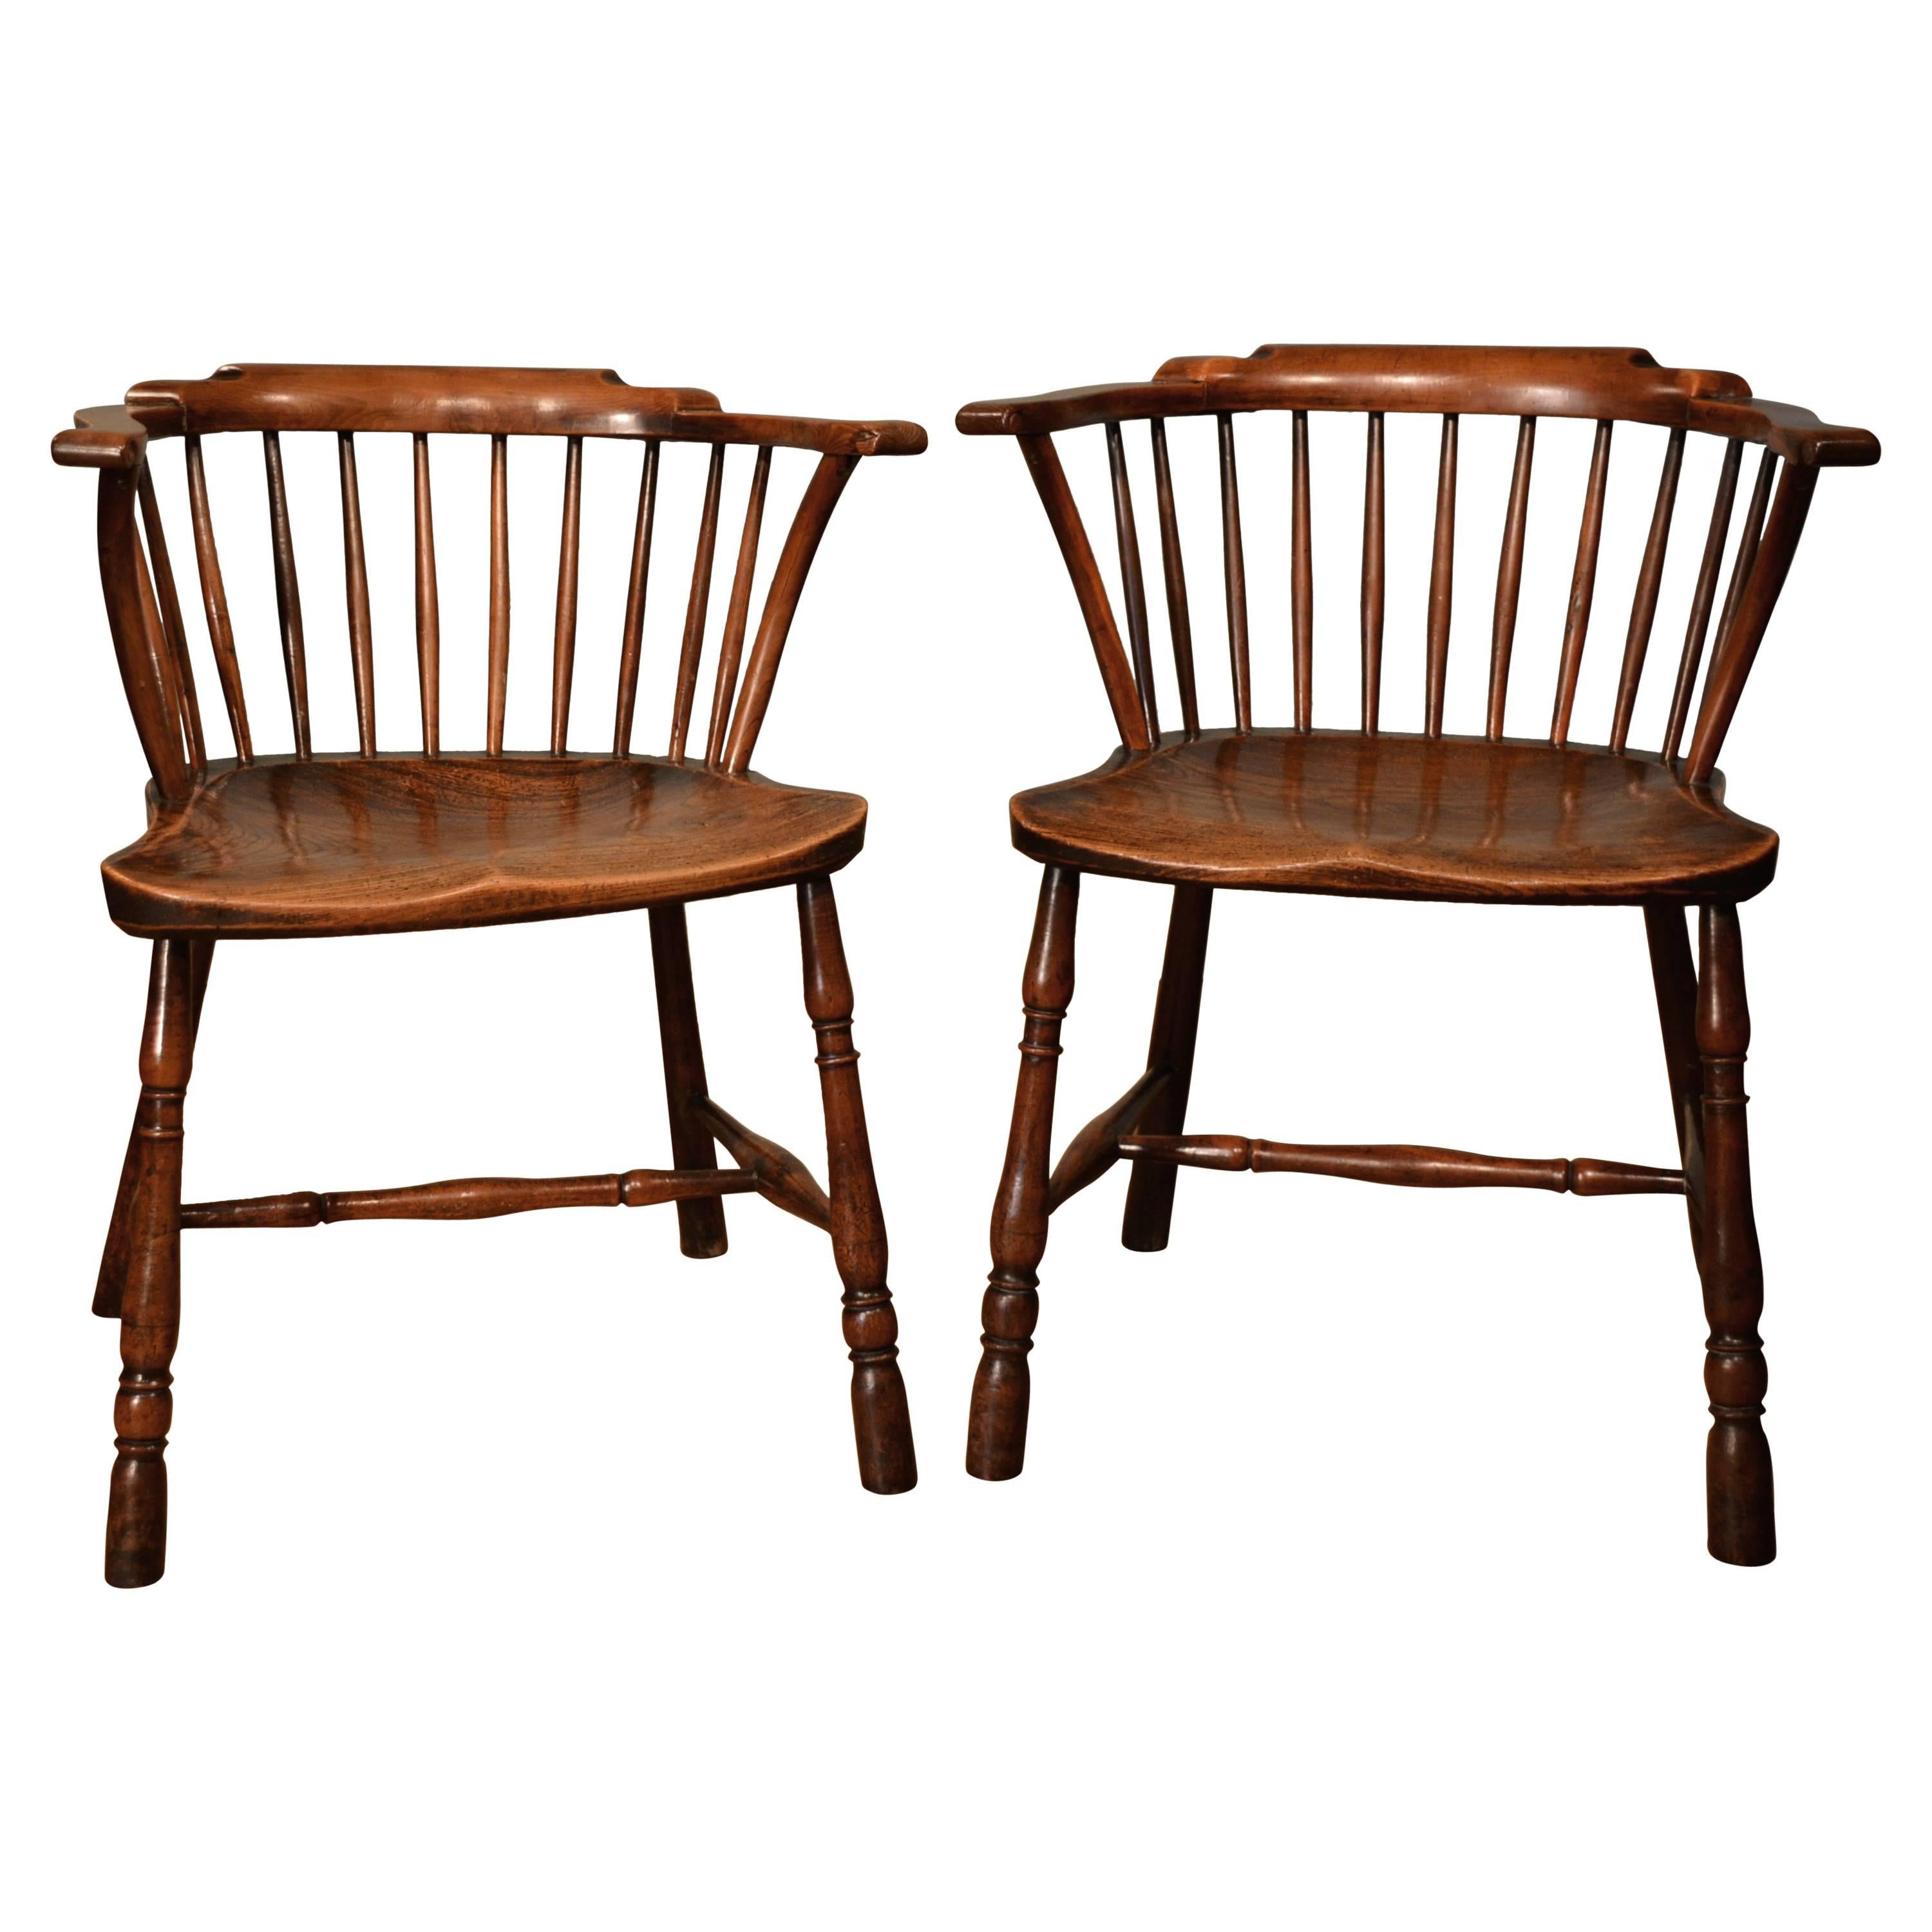 Rare 18th Century Pair of Low Back Yew Wood 'Library Chairs'